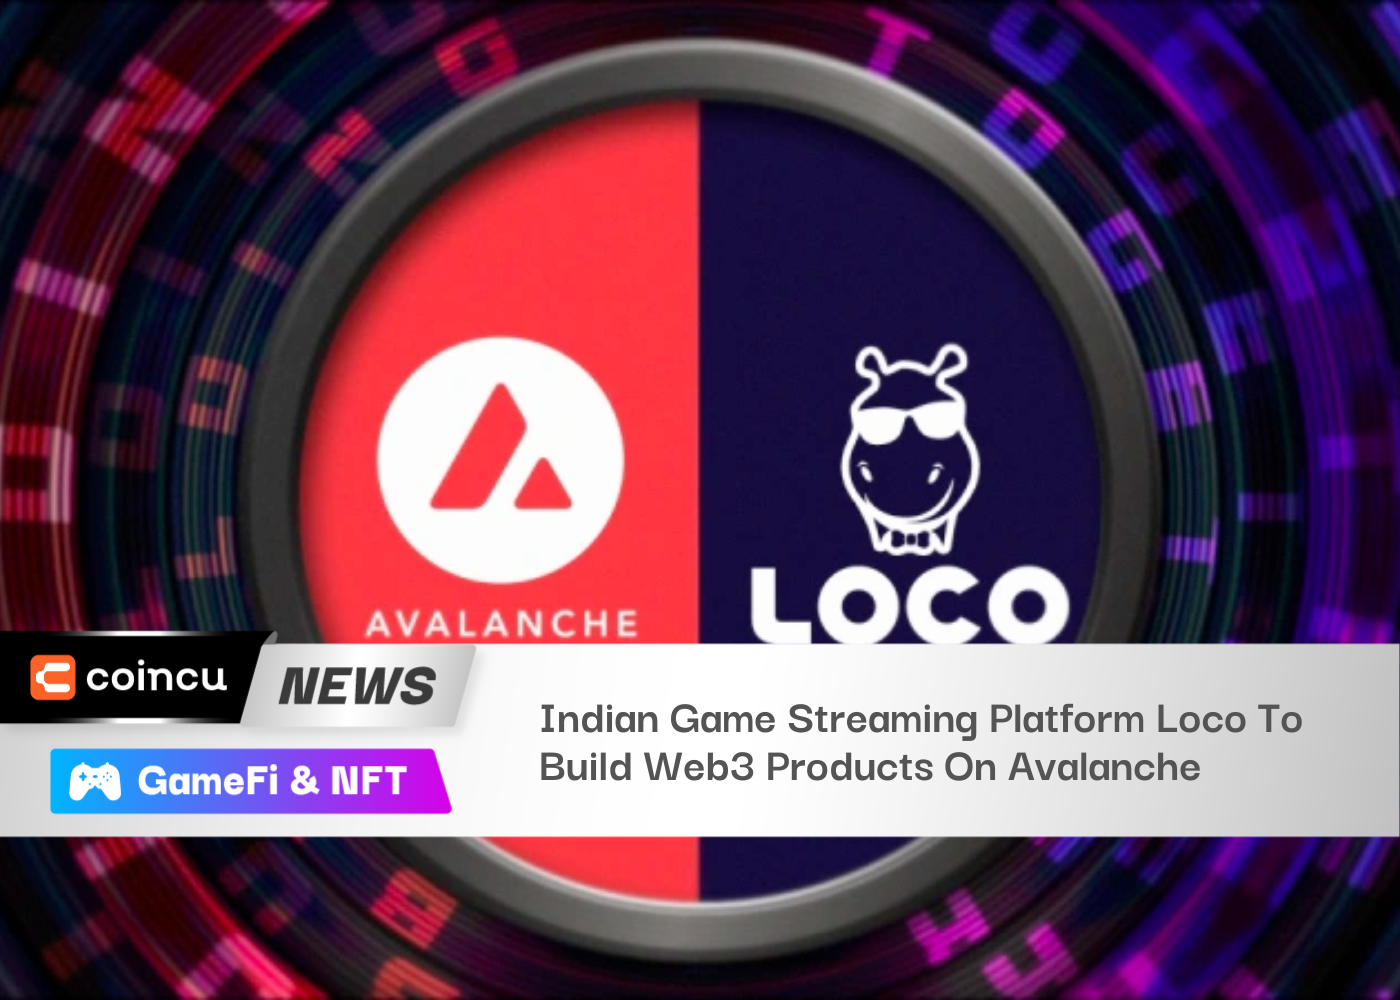 Indian Game Streaming Platform Loco To Build Web3 Products On Avalanche